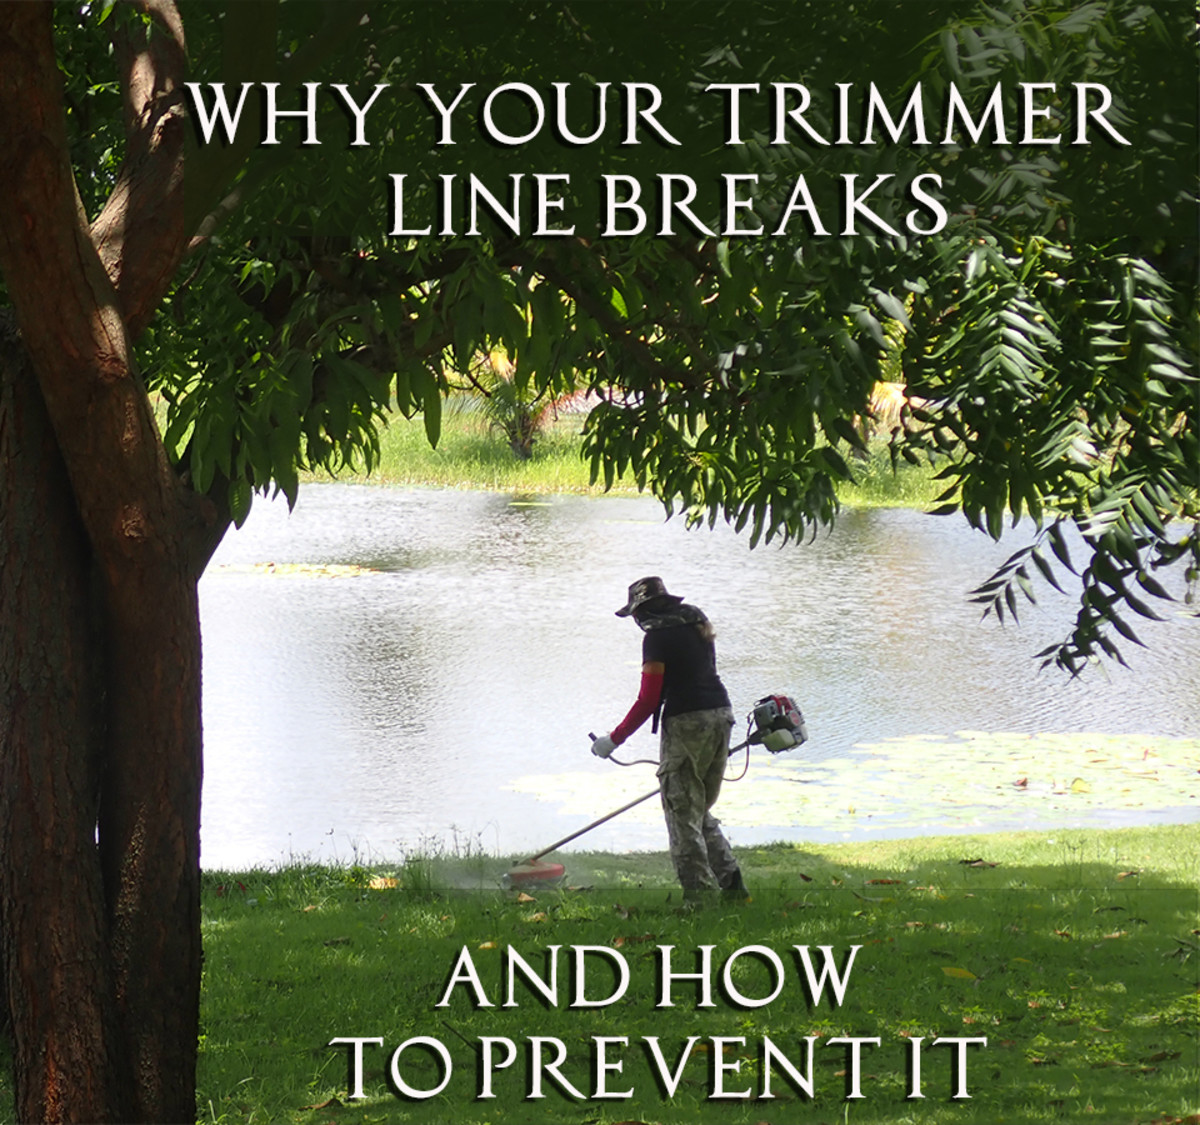 Be sure to take care cutting near trees and walls.